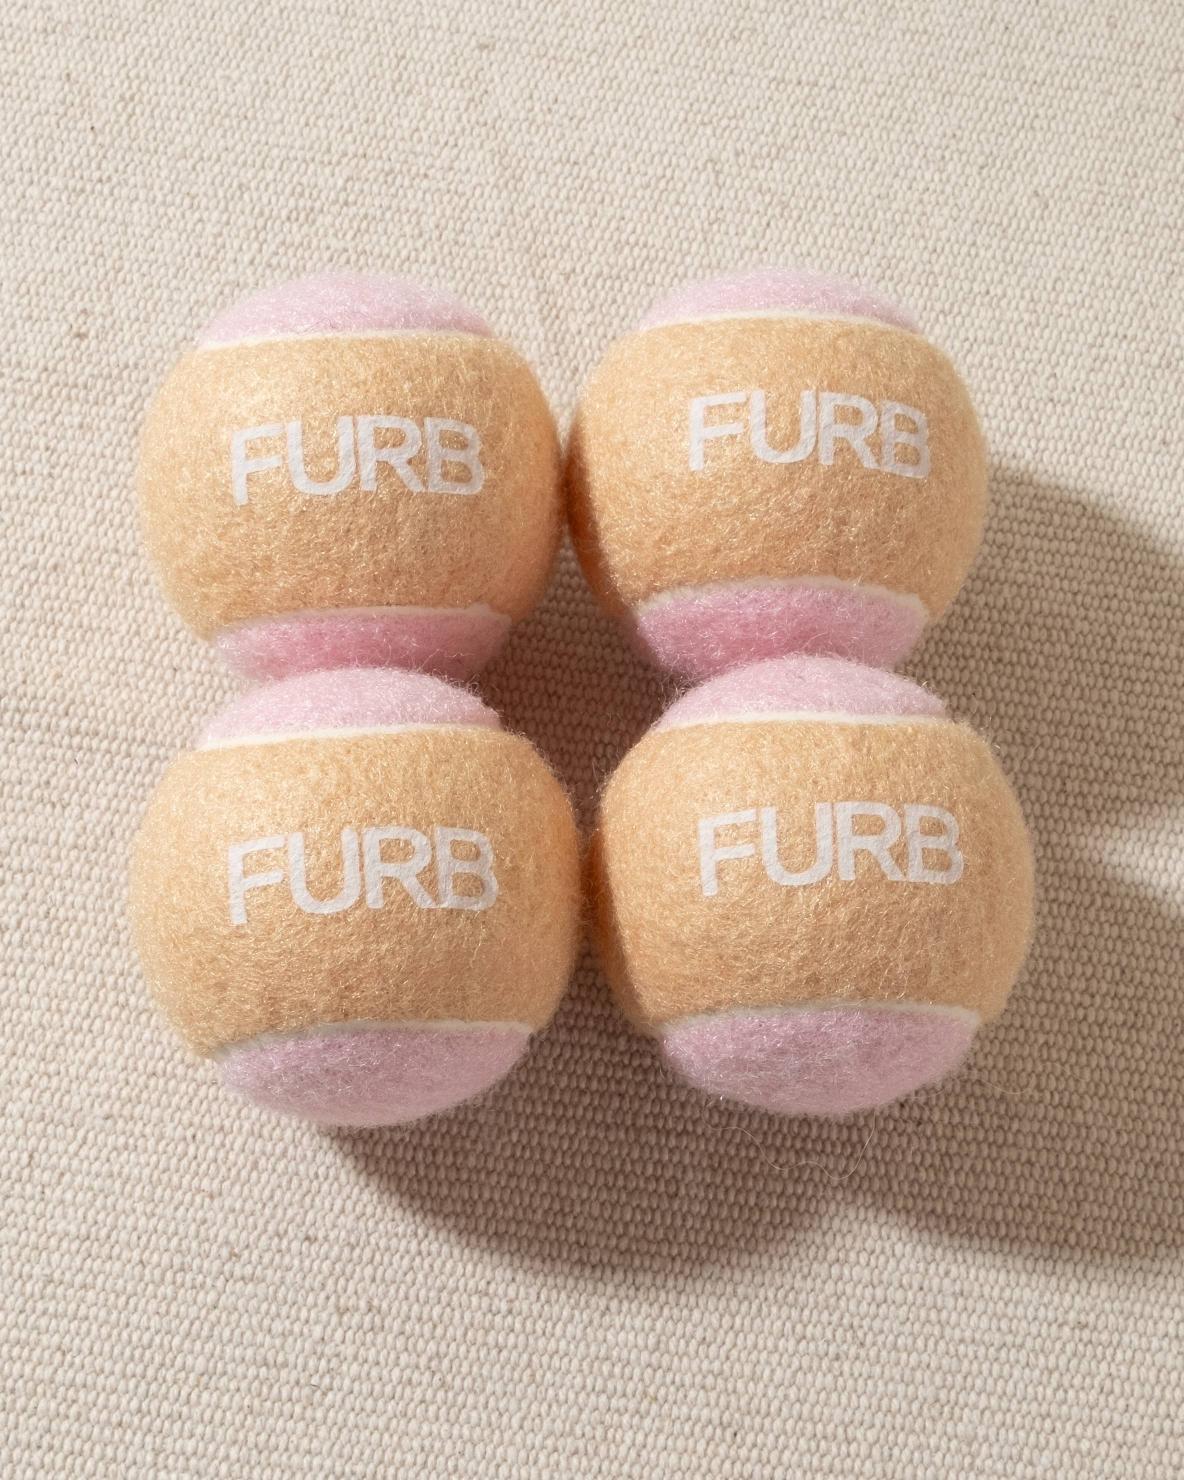 tan and blush tennis ball with white furb logo for dogs